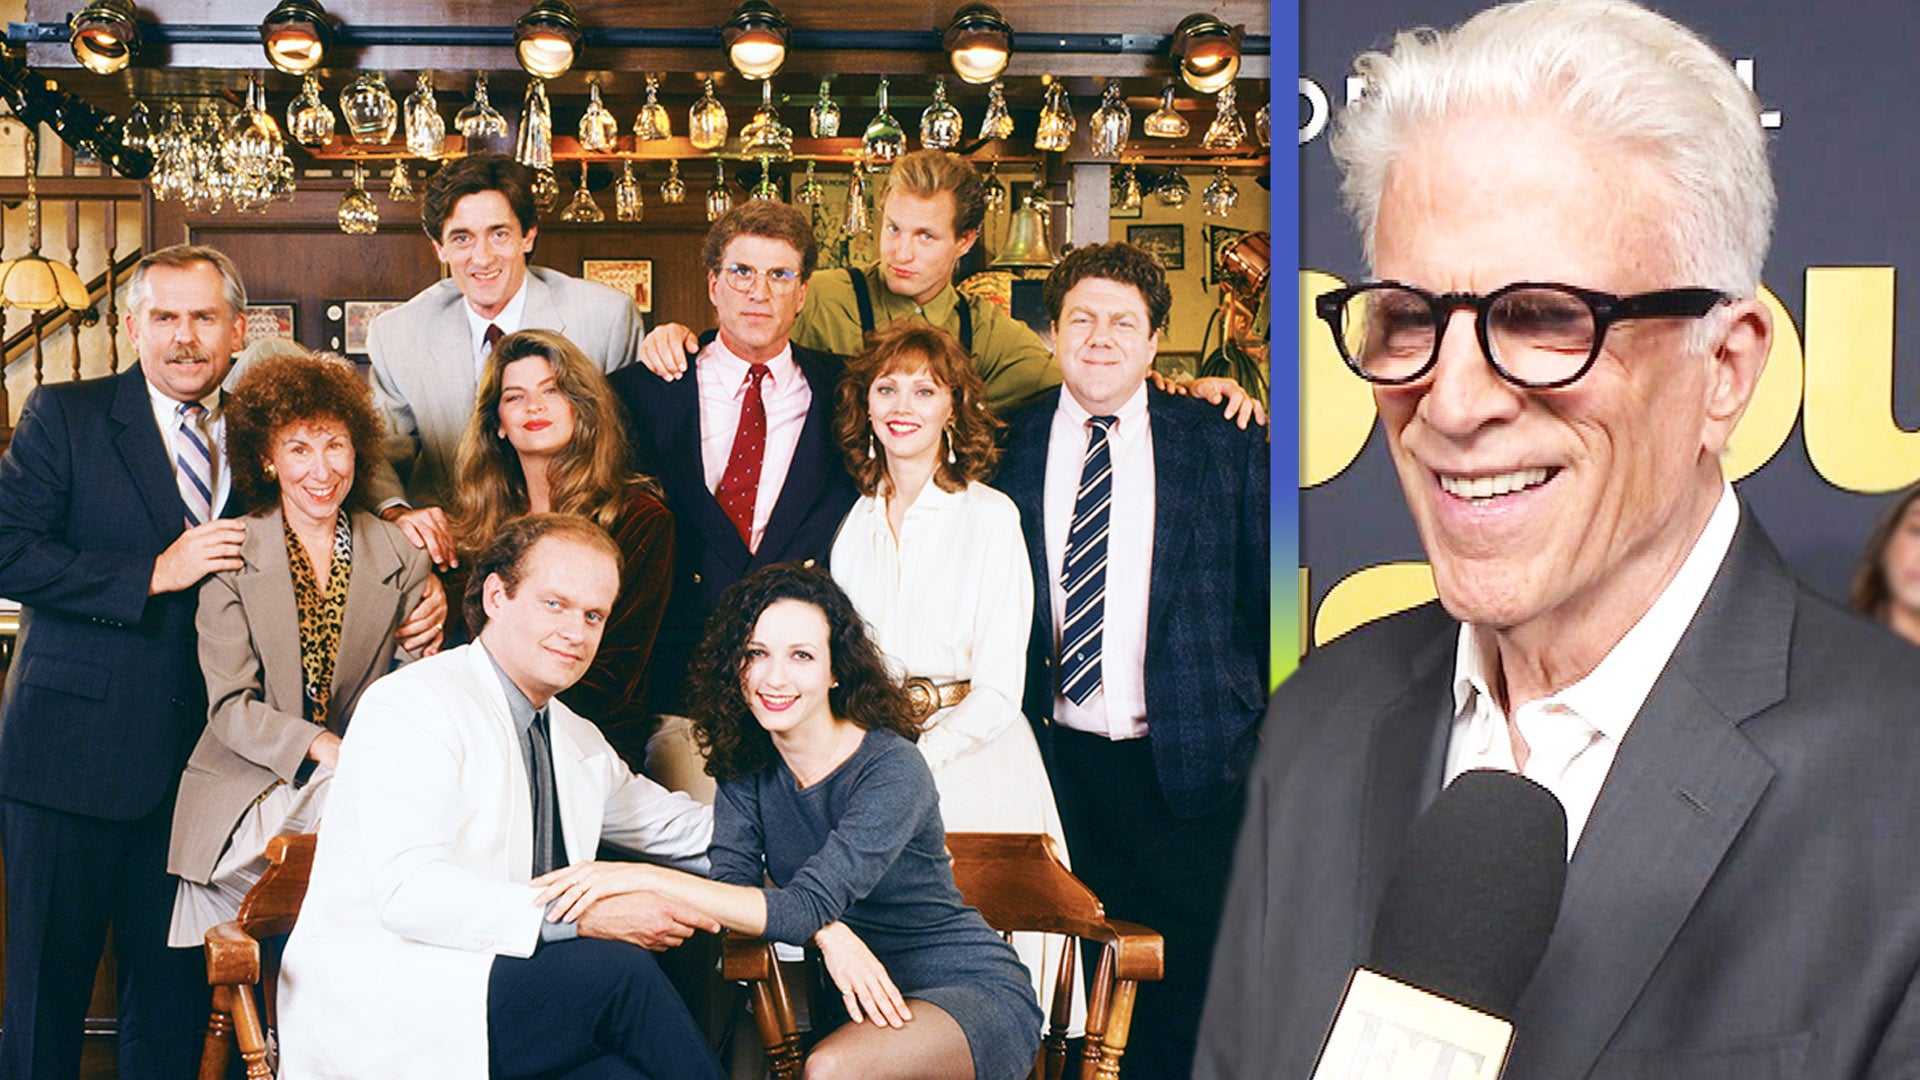 Ted Danson Dishes on ‘Cheers’ Cast Reunion and If a Reboot Might Happen (Exclusive)